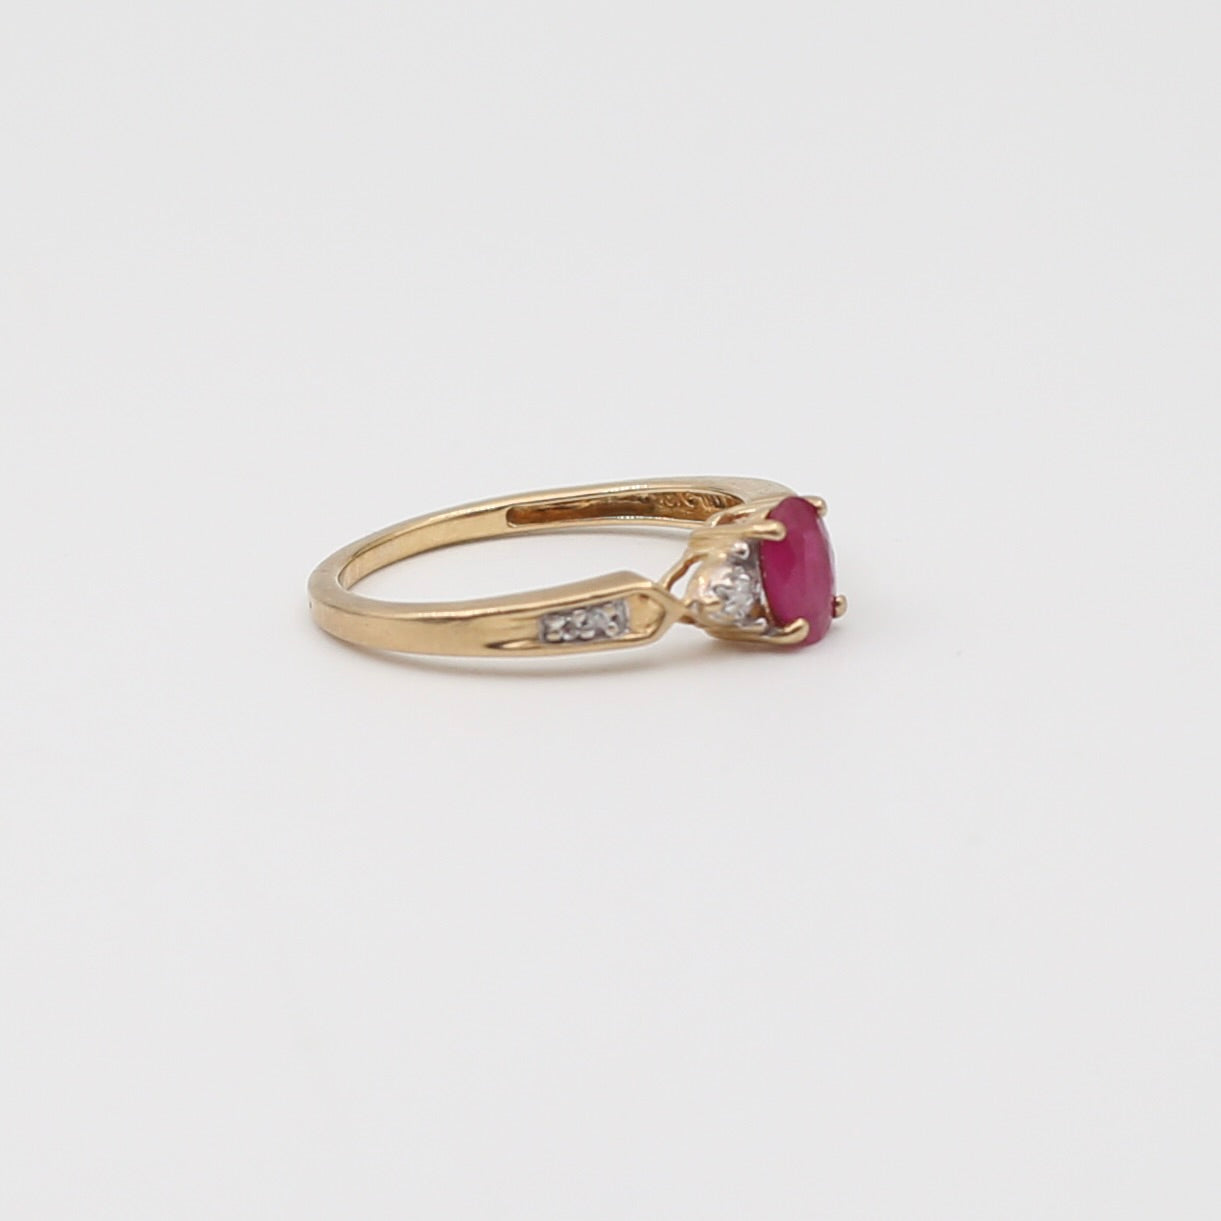 10K Diamond with Ruby Ring